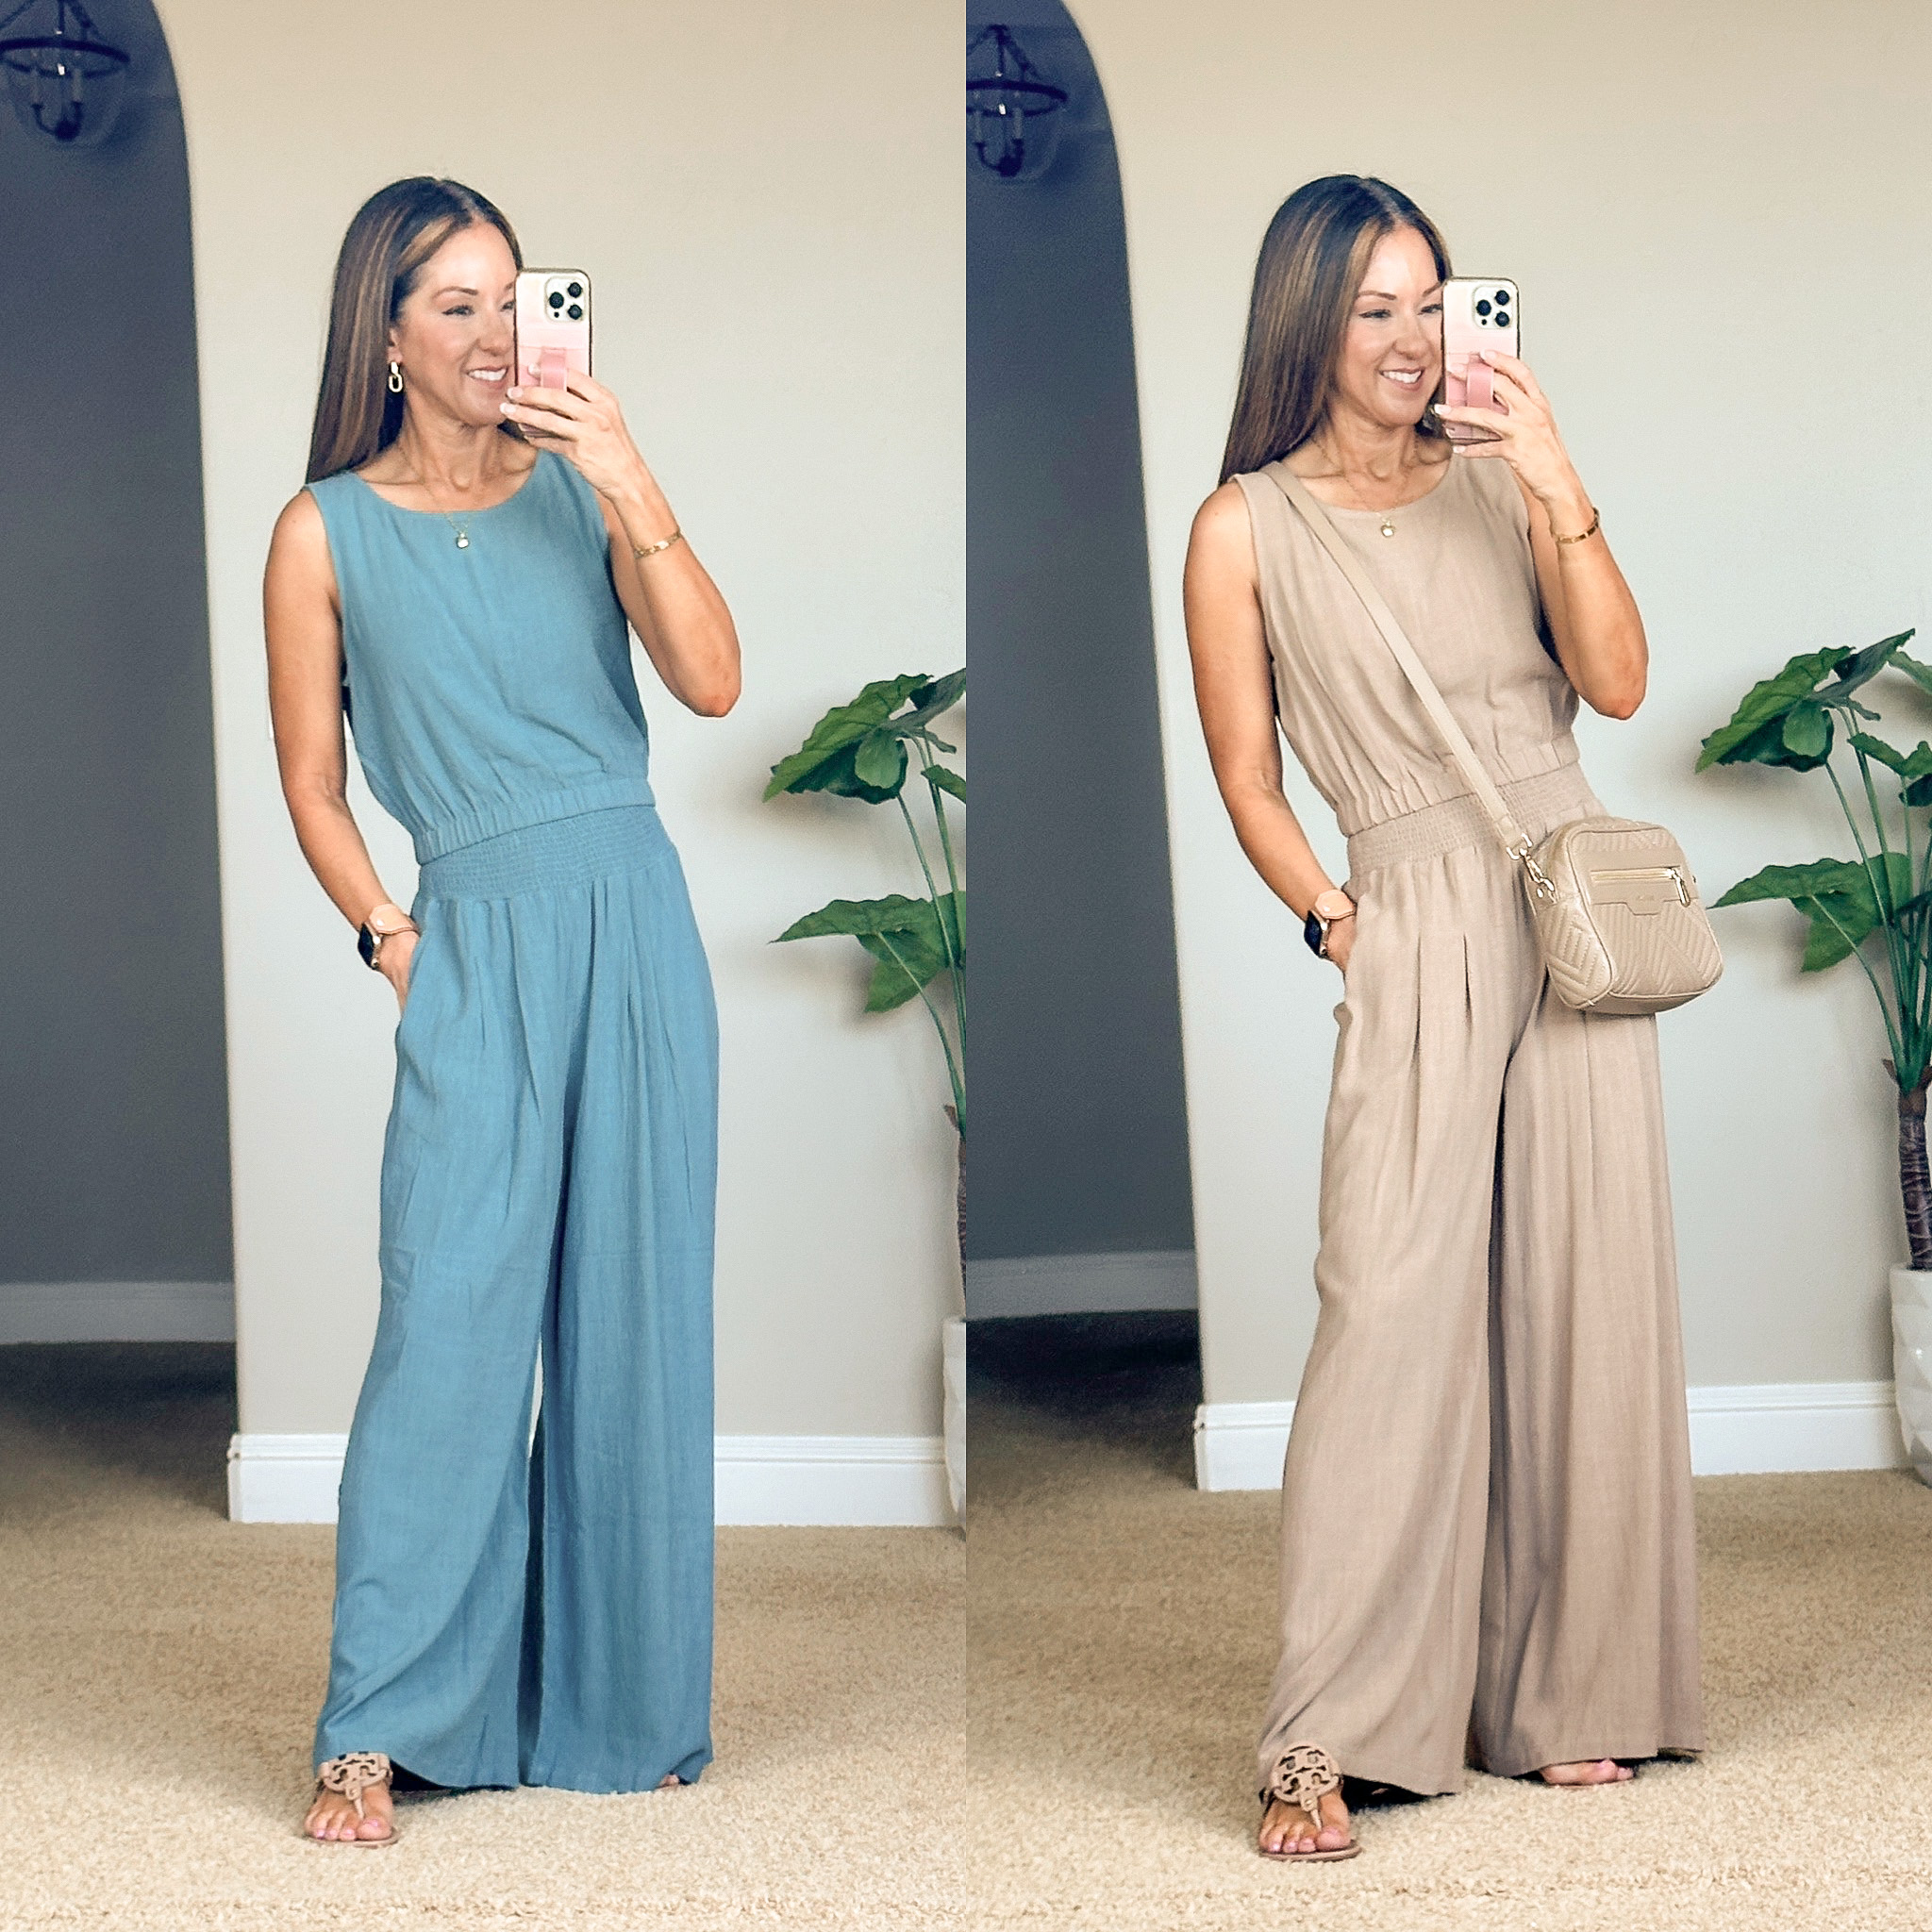 may outfit recap: trending fashion and favorite finds | may, outfit round up, fashion, trending fashion, affordable fashion, summer outfit inspo, matching set, linen set, casual outfit inspo, accessories, amazon fashion